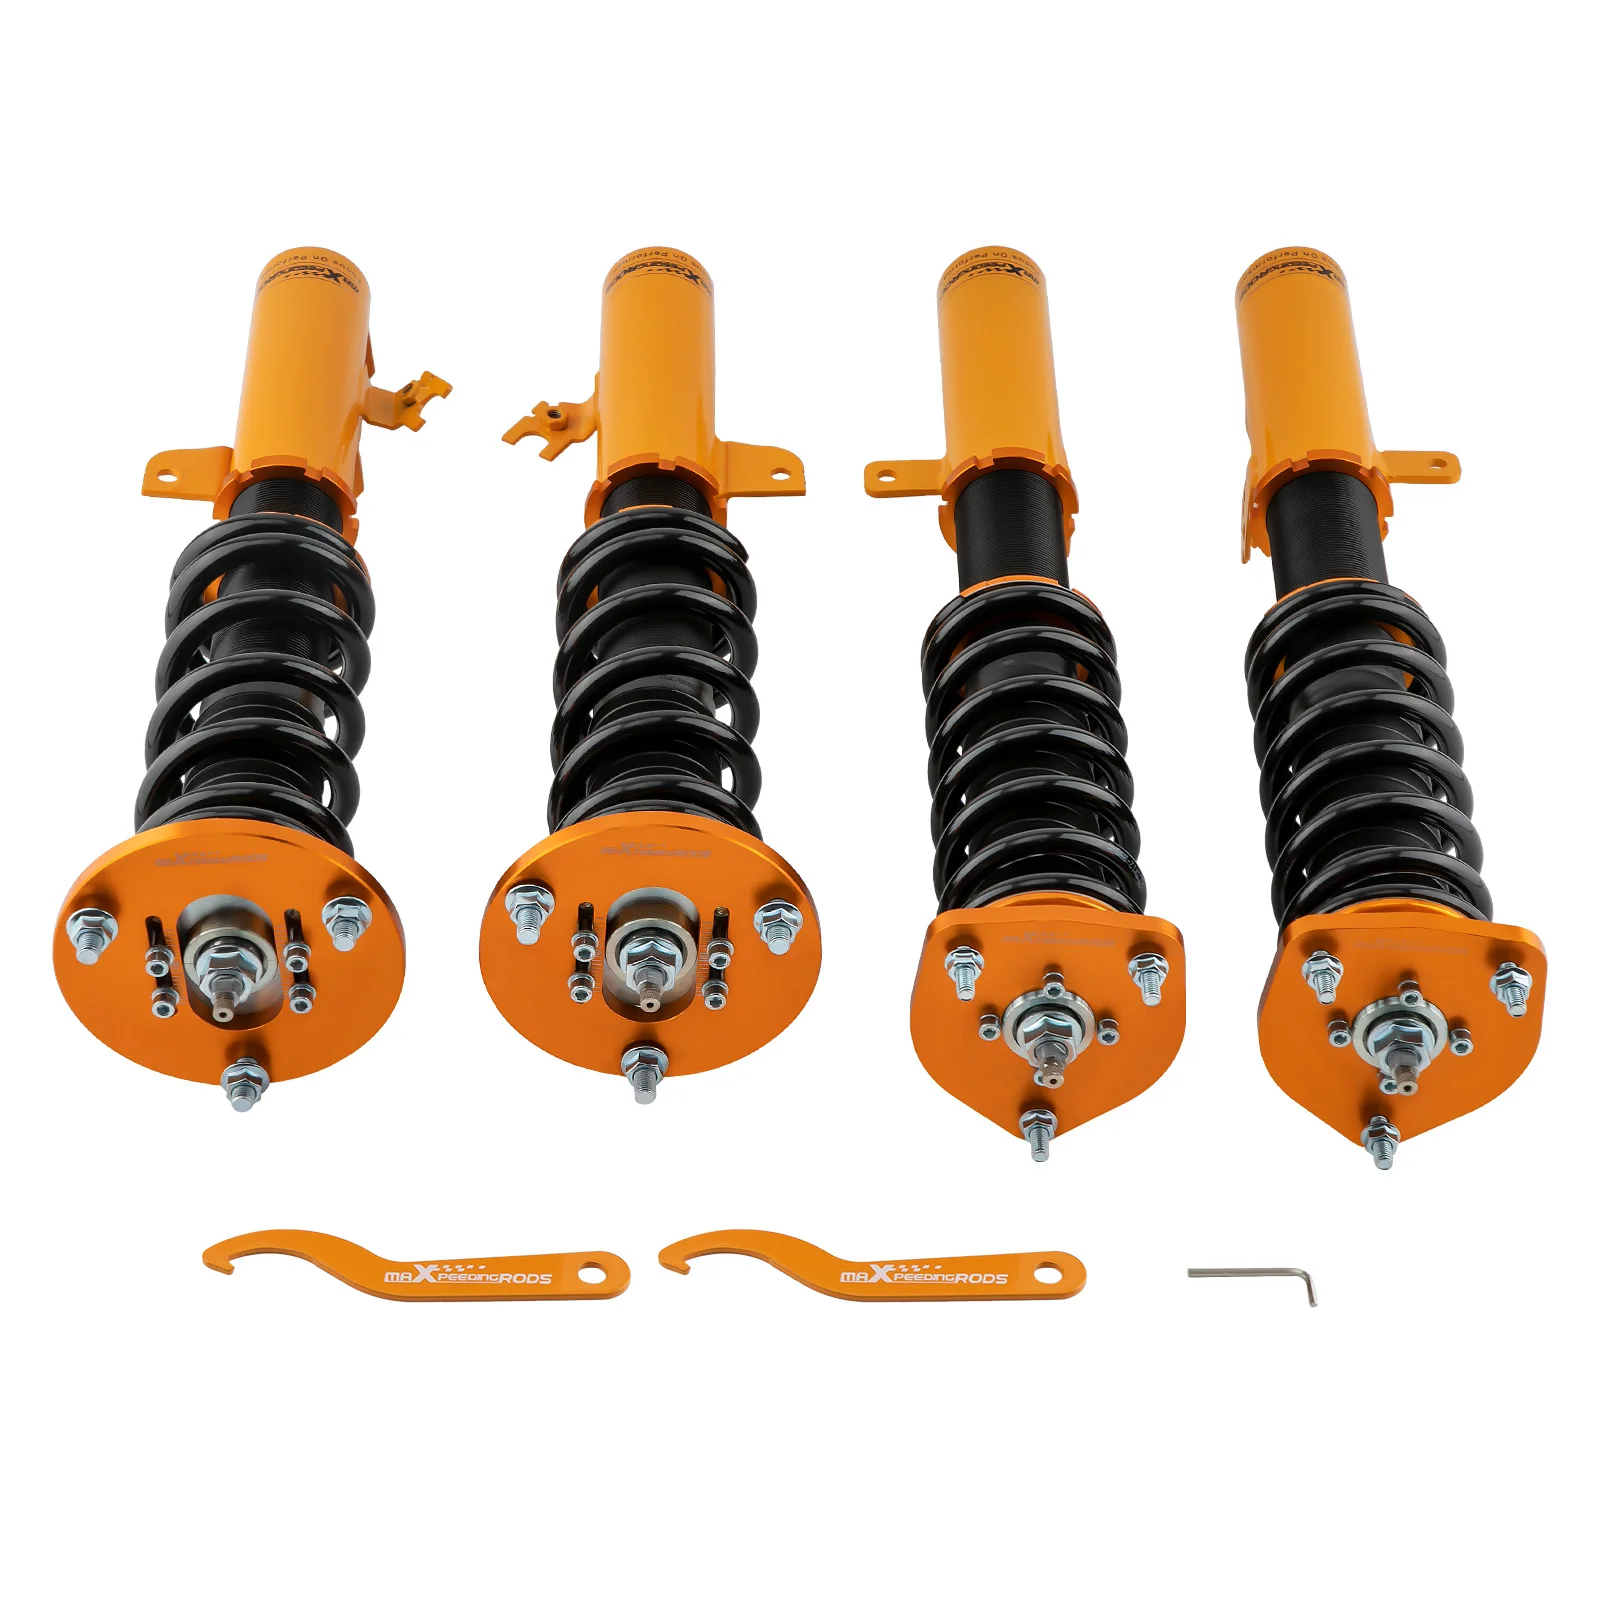 

MaXpeedingrods 24-way Levels Coilover For Lexus ES300 1997-2001 For Toyota Camry 1995-2001 Adjustable Damper Shocks Absorbers